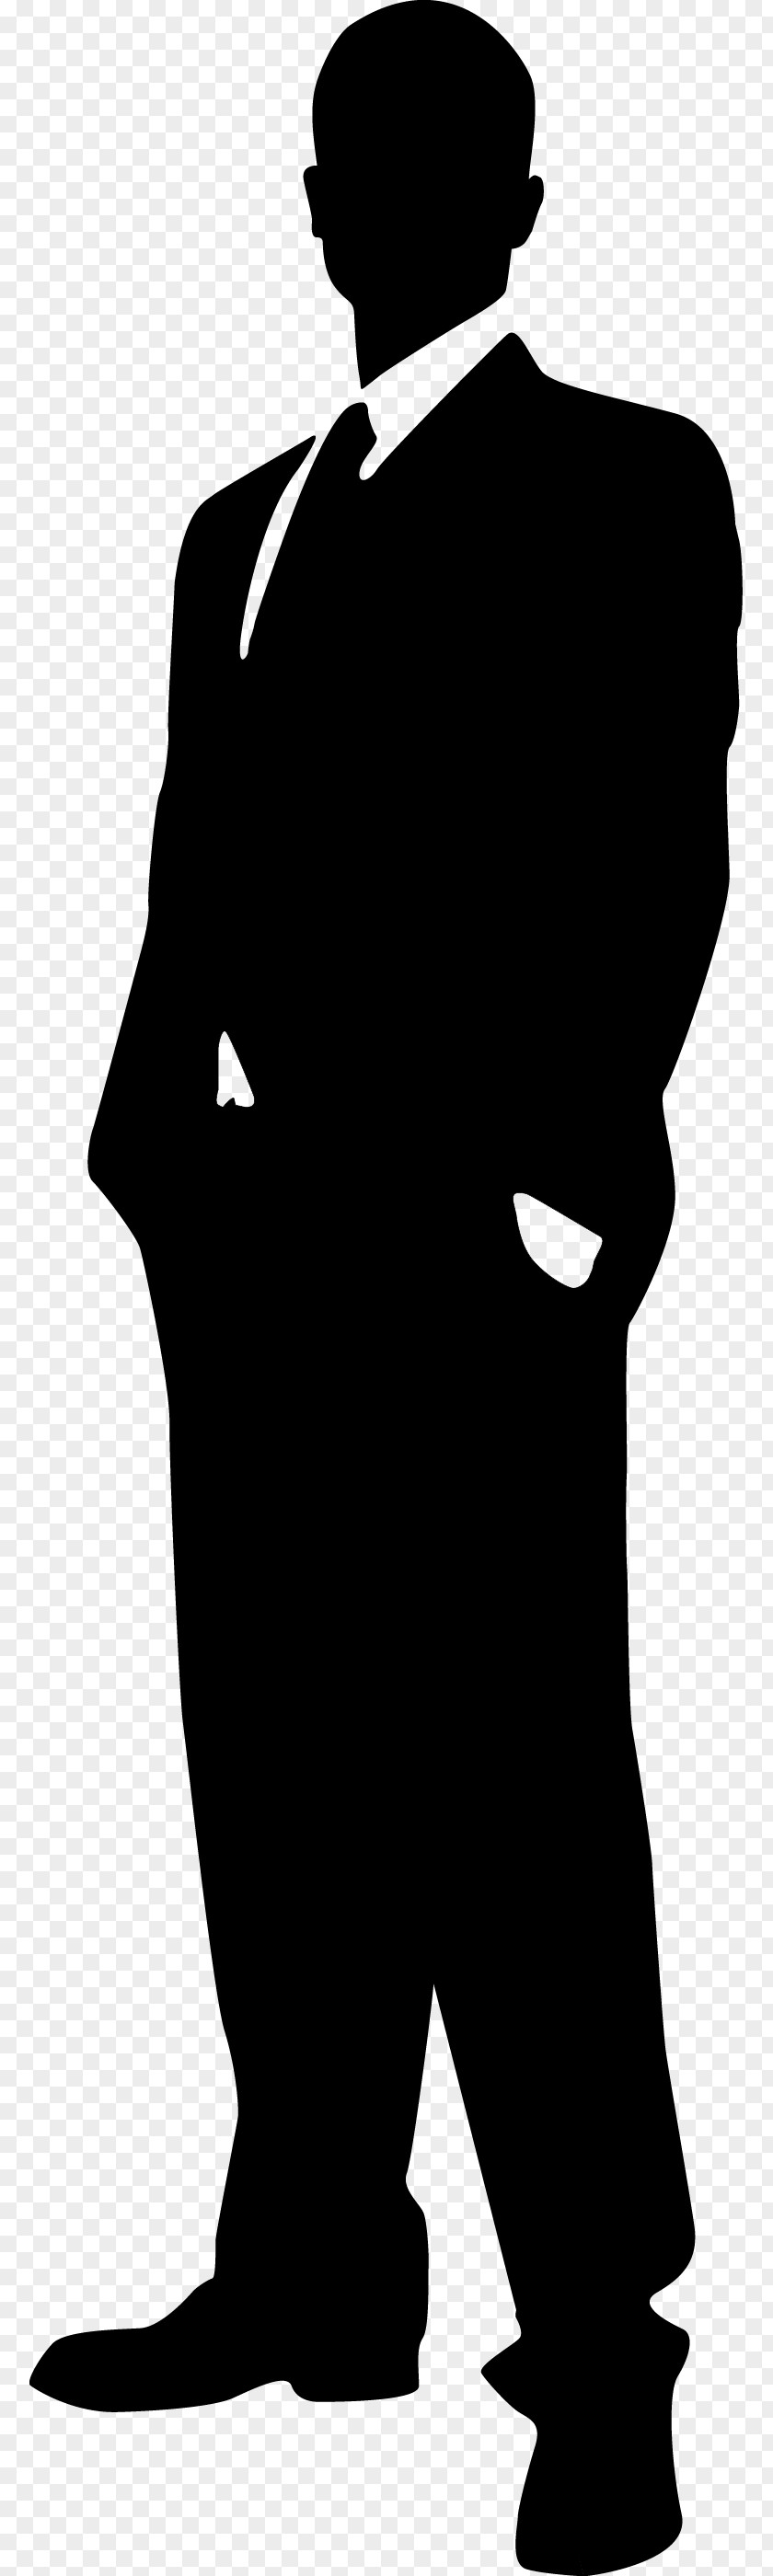 Actor Silhouette Clip Art PNG